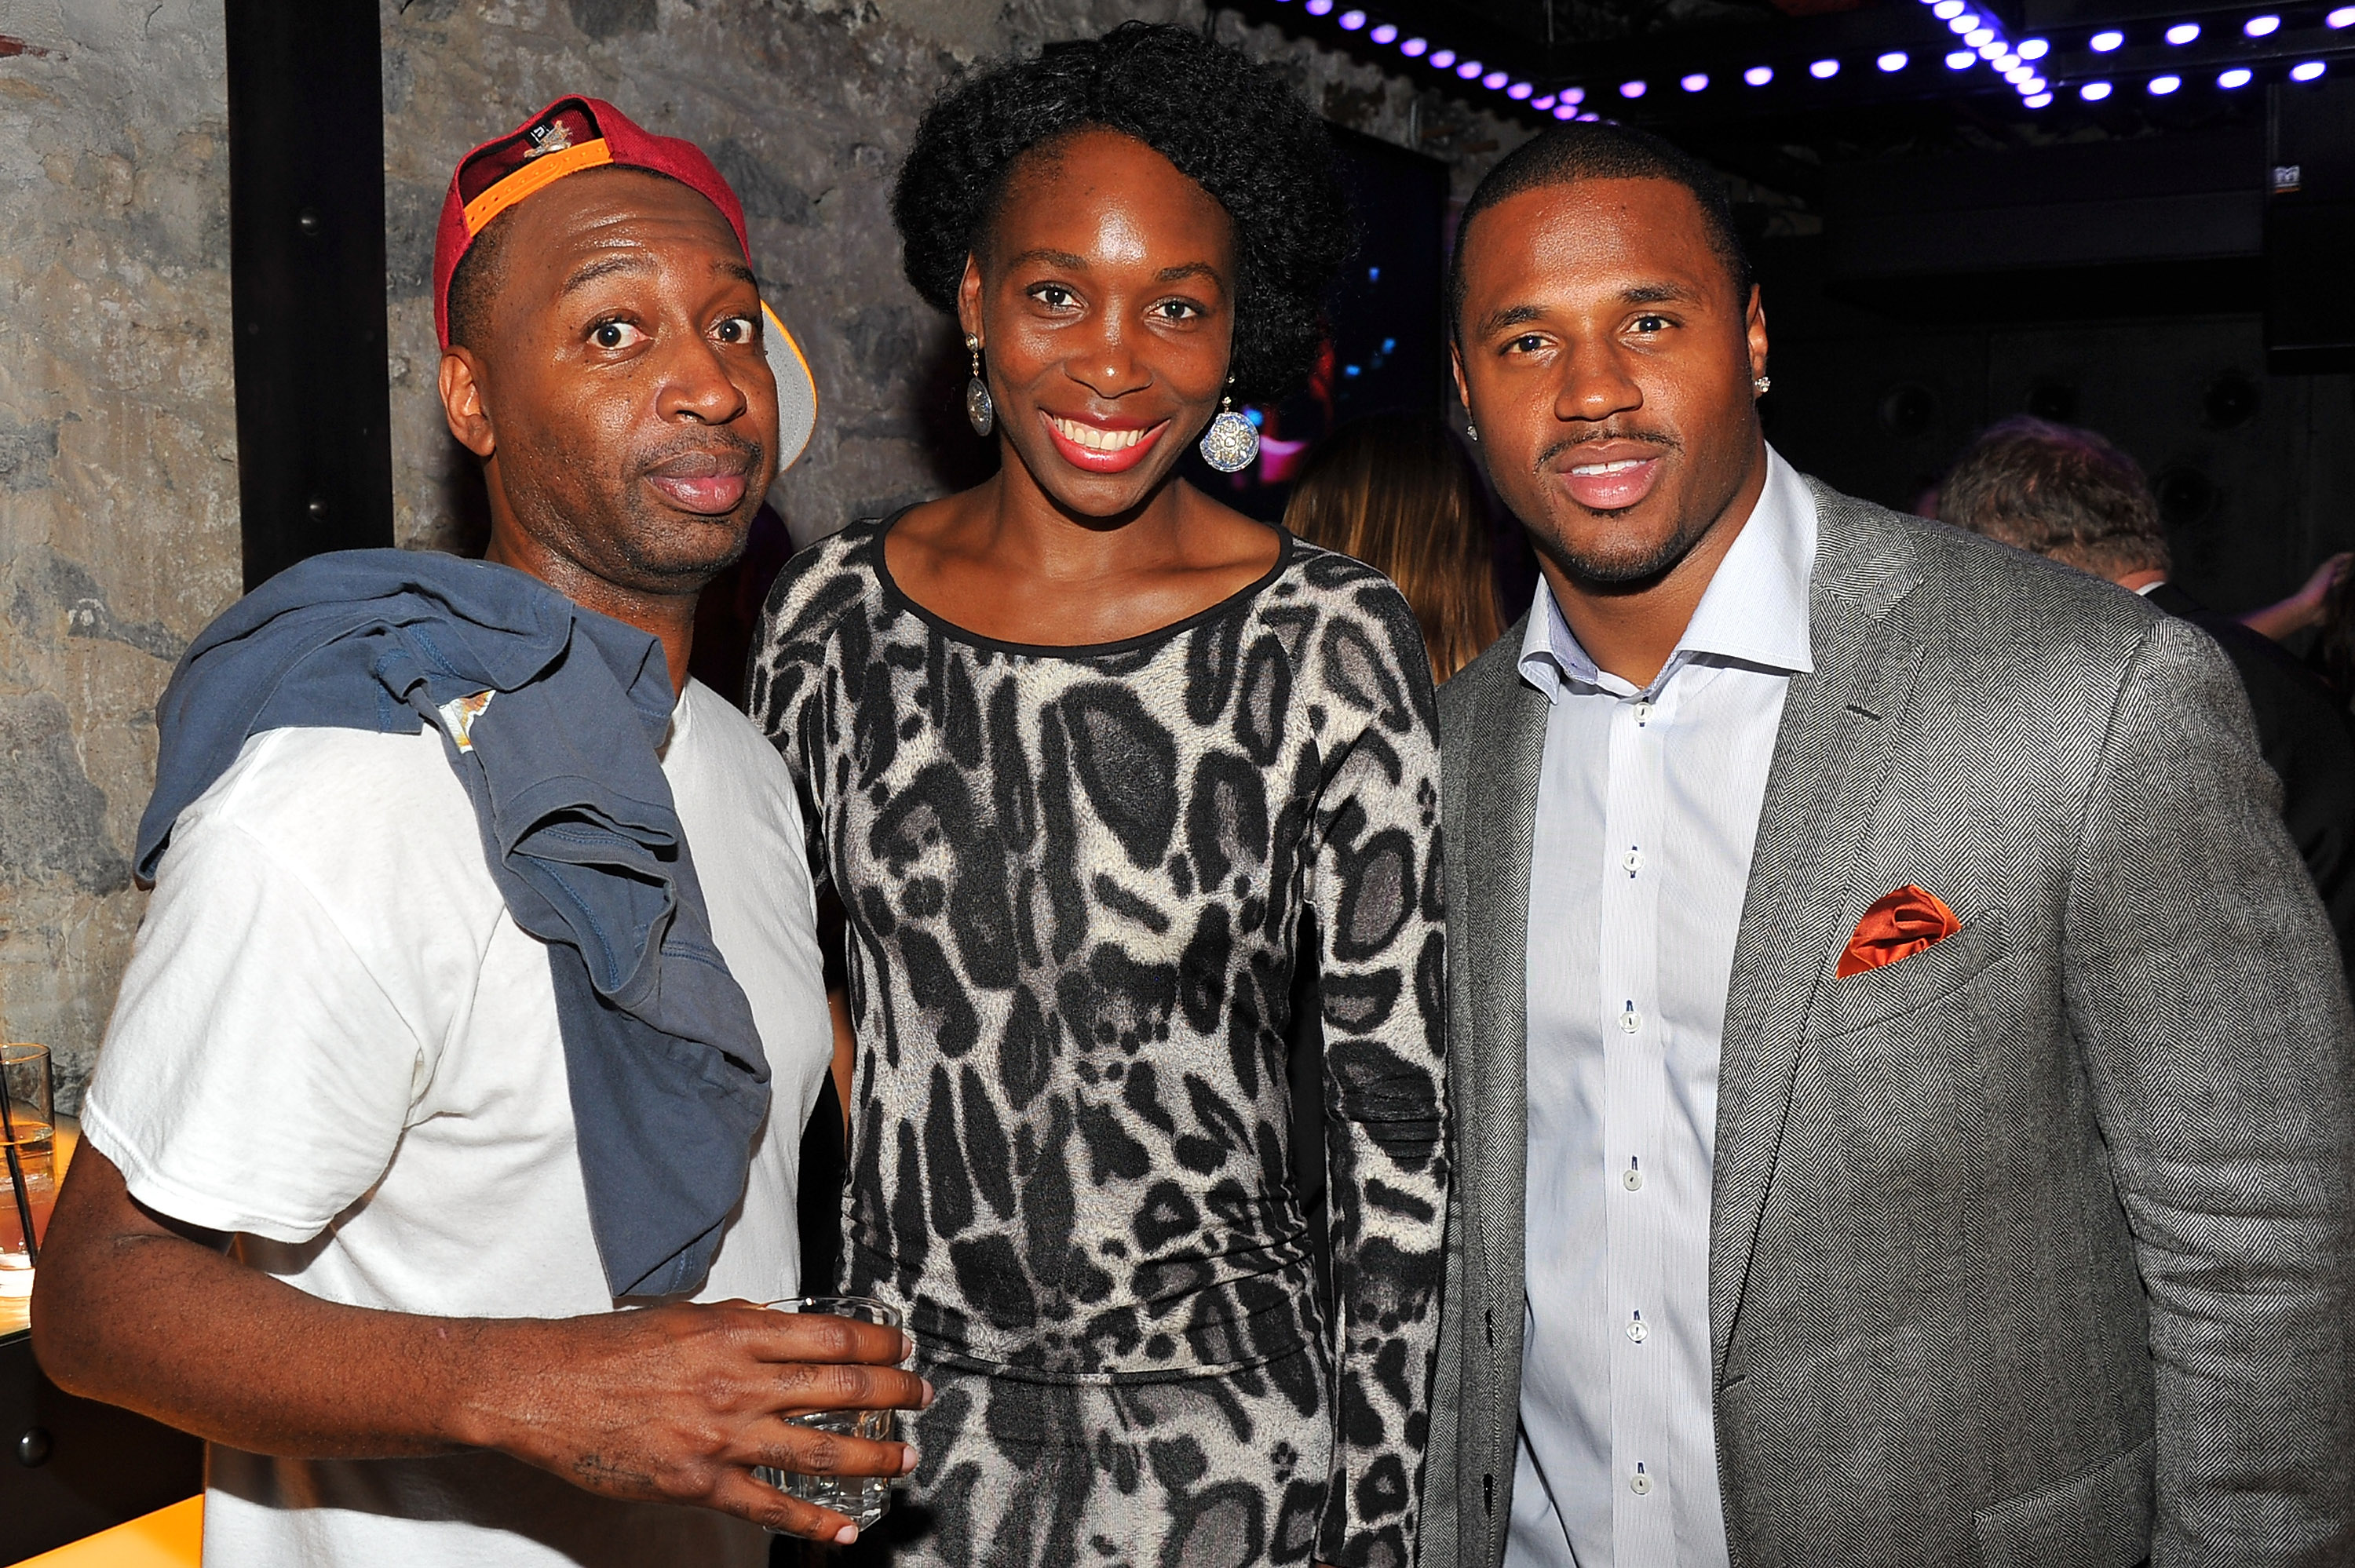 NEW YORK, NY - APRIL 22:  (L-R) MC Ricky 'Rickonia' Smith, professional tennis player Venus Williams, and DFGC President and co-founder and professional football player James Anderson attend as James Anderson launches DFGC charity co-founded with Serena Williams at Jelsomino on April 22, 2013 in New York City.  (Photo by Theo Wargo/Getty Images for Driving Force Giving Circle)